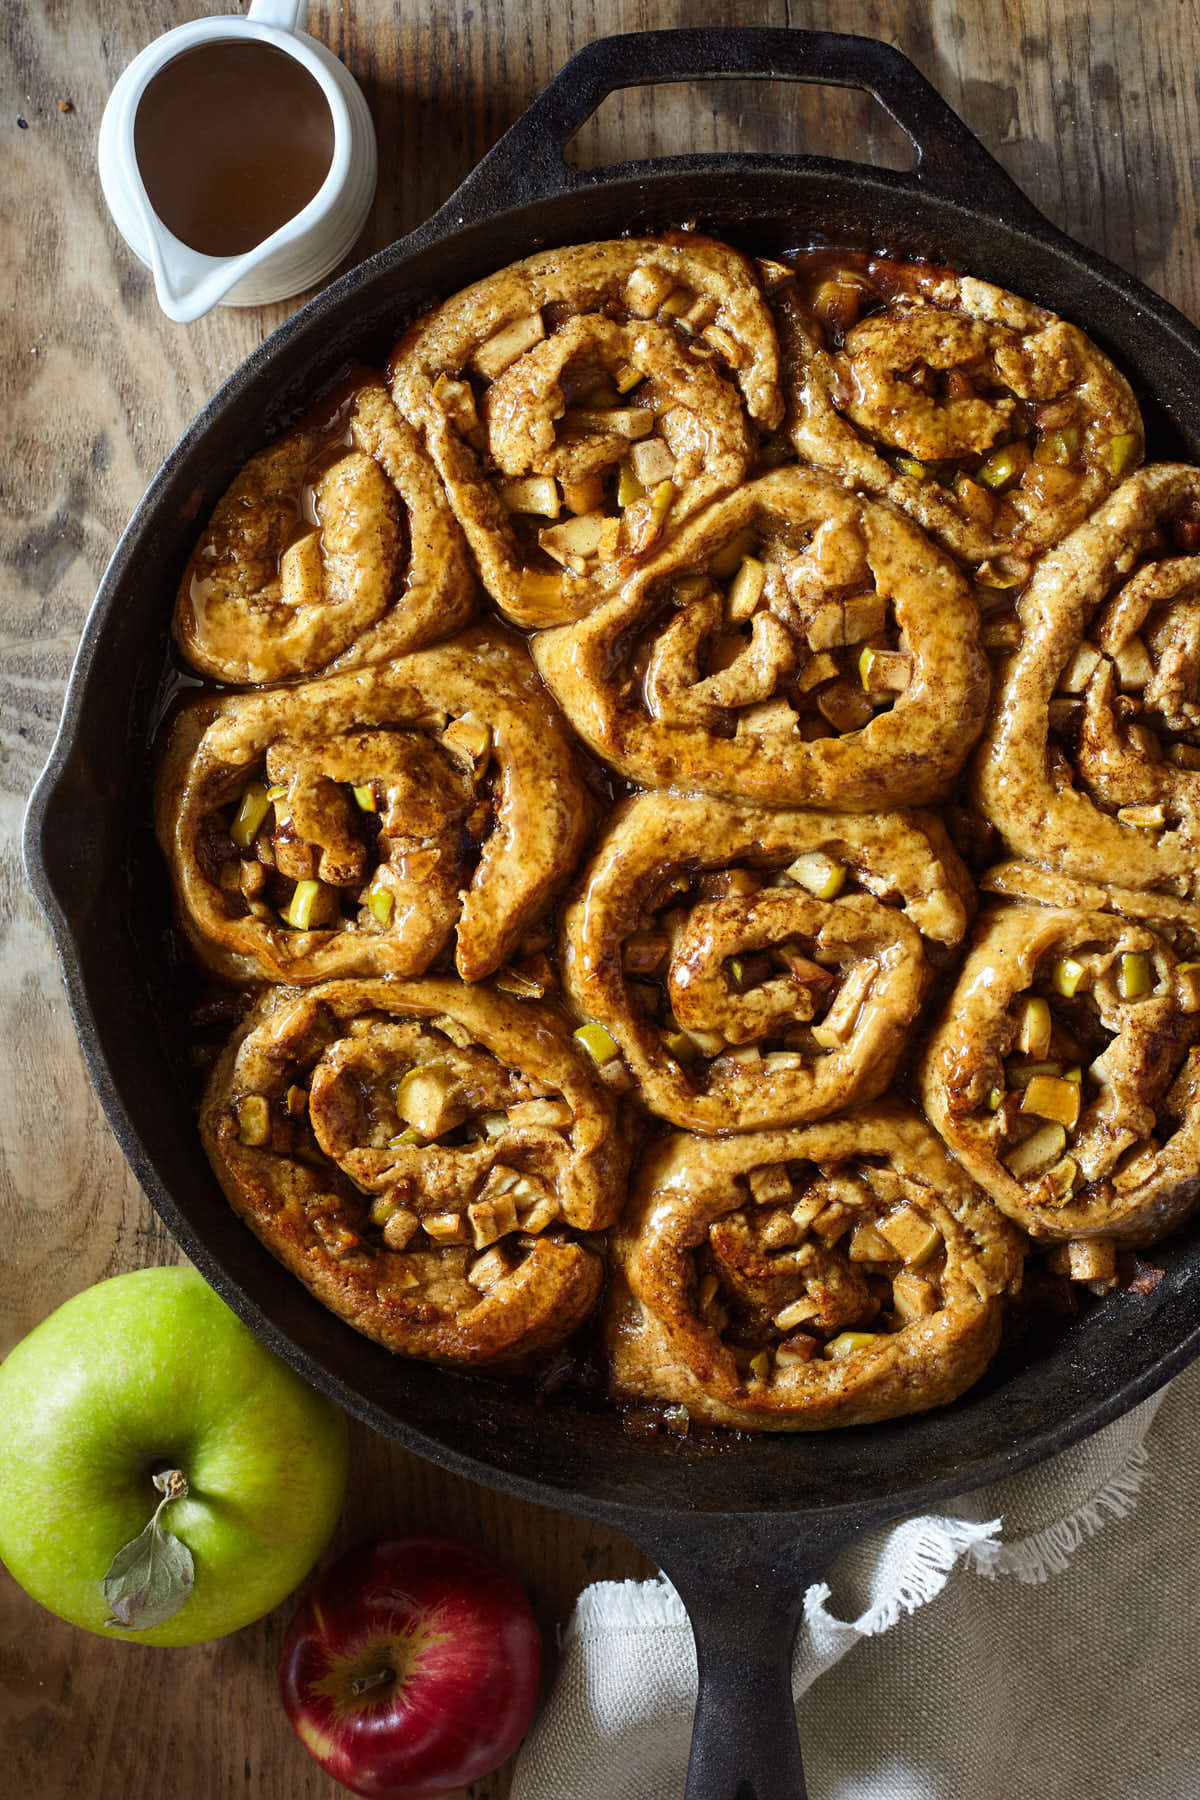 Caramel apple cinnamon buns cooling on a wooden table in a cast iron pan